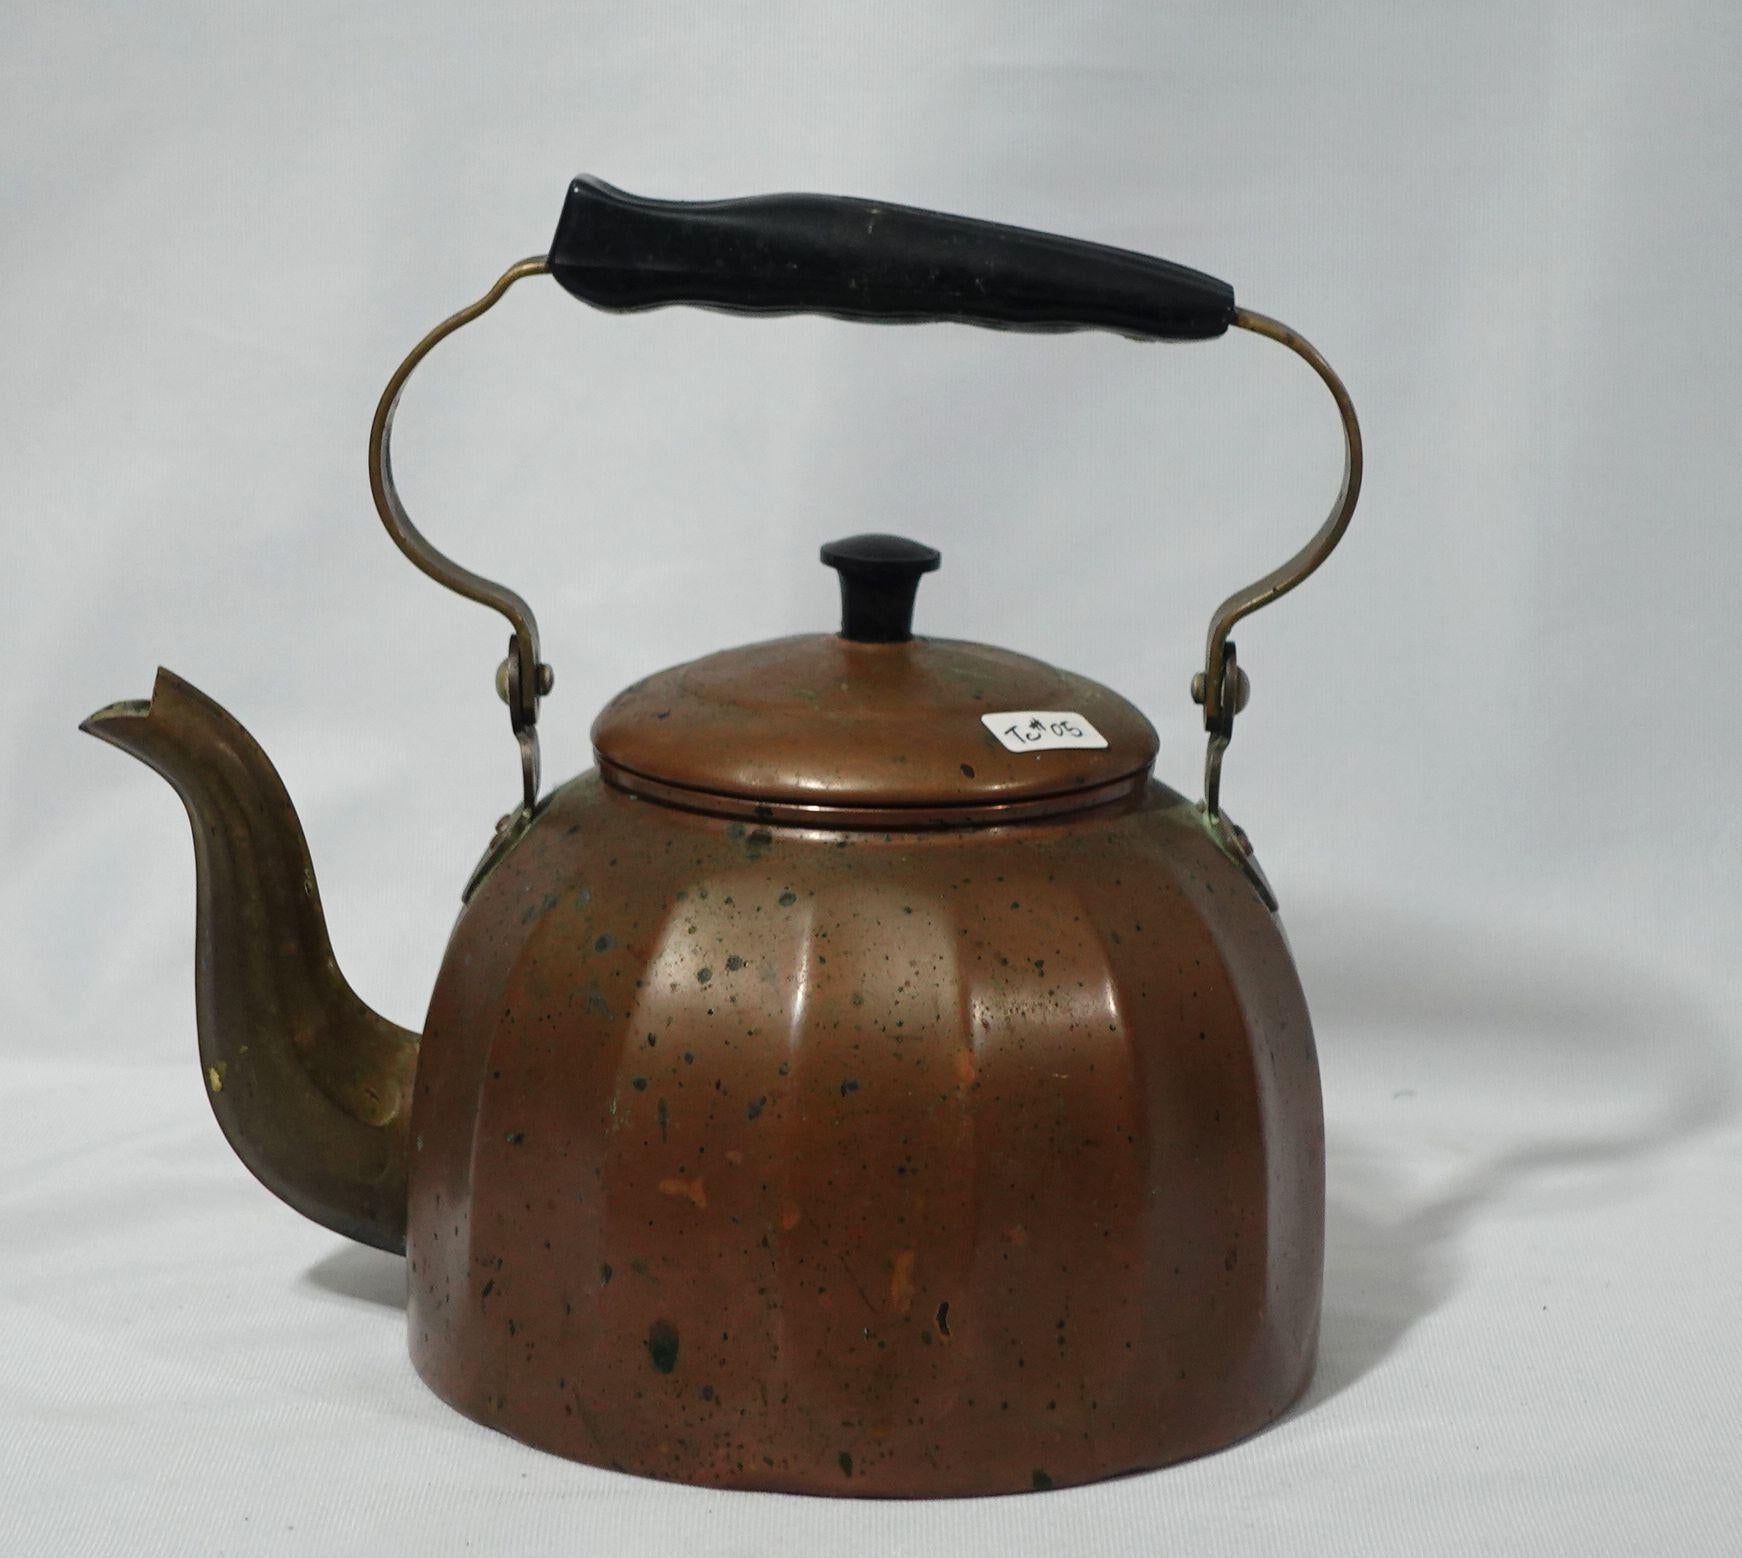 Hand-hammered-shaped copper tea kettle with a wood handle marked on the bottom 